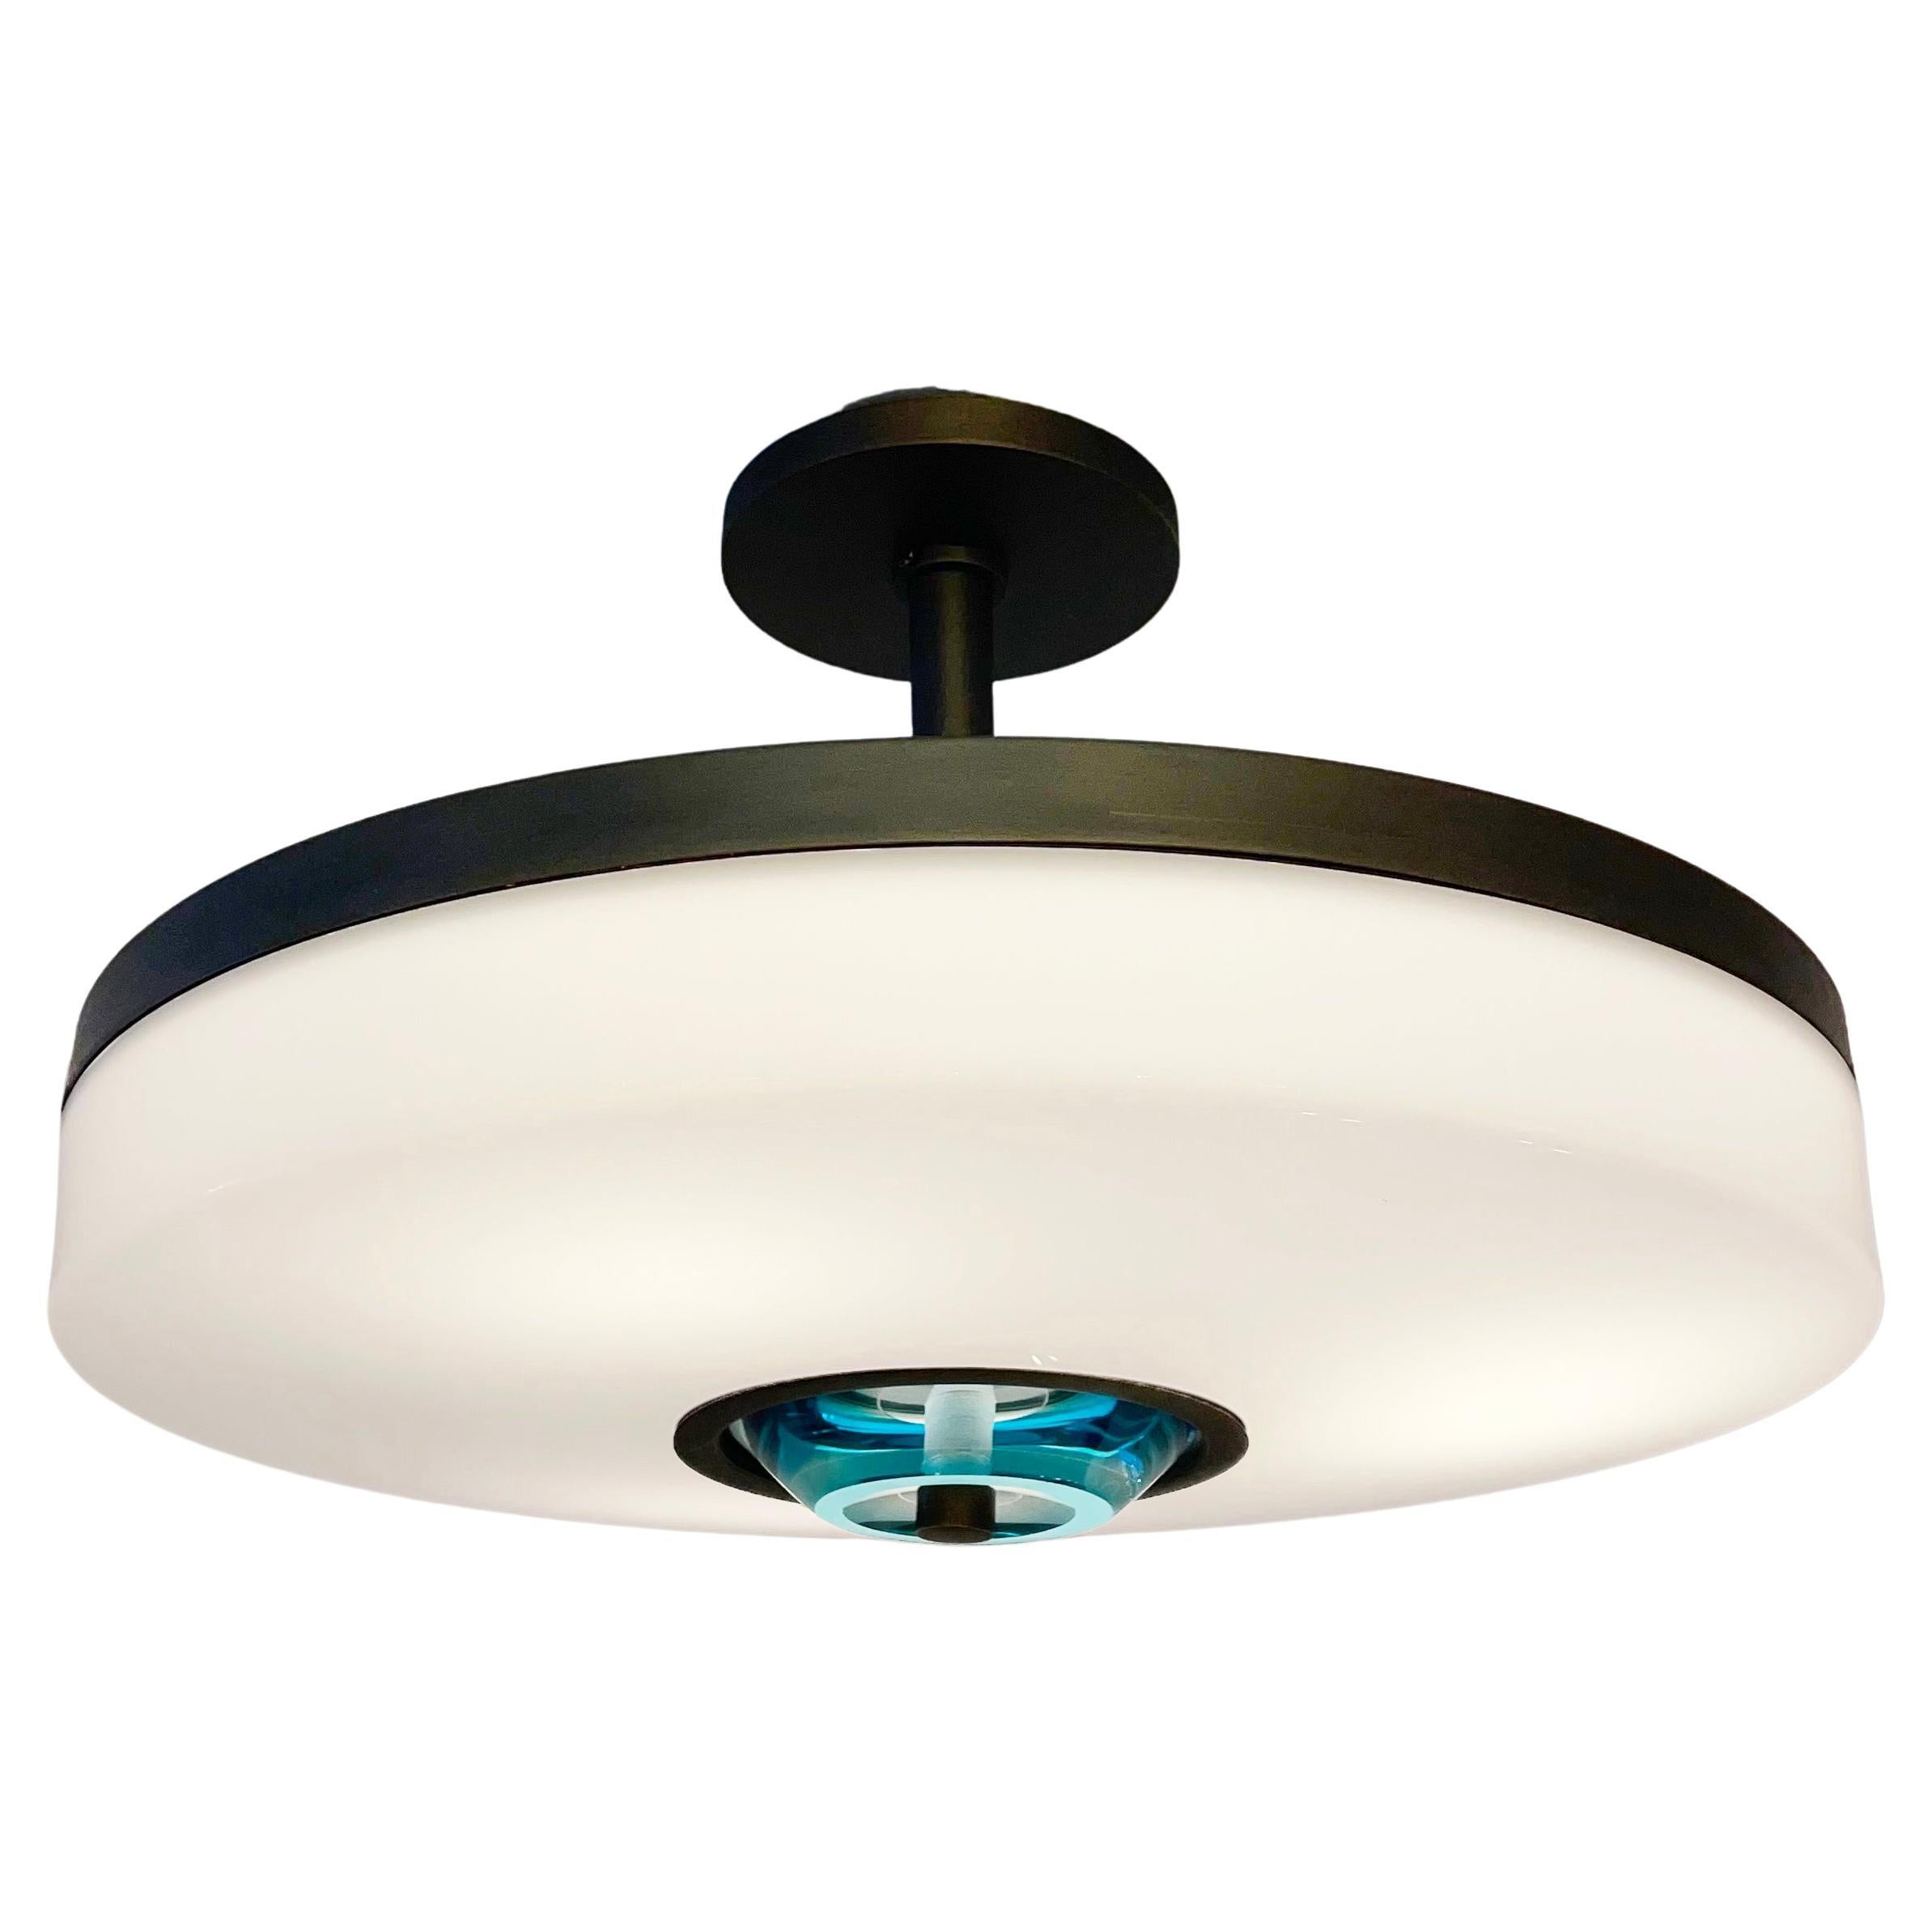 Iris Piccolo Ceiling Light by Form A- Turquoise Glass Version